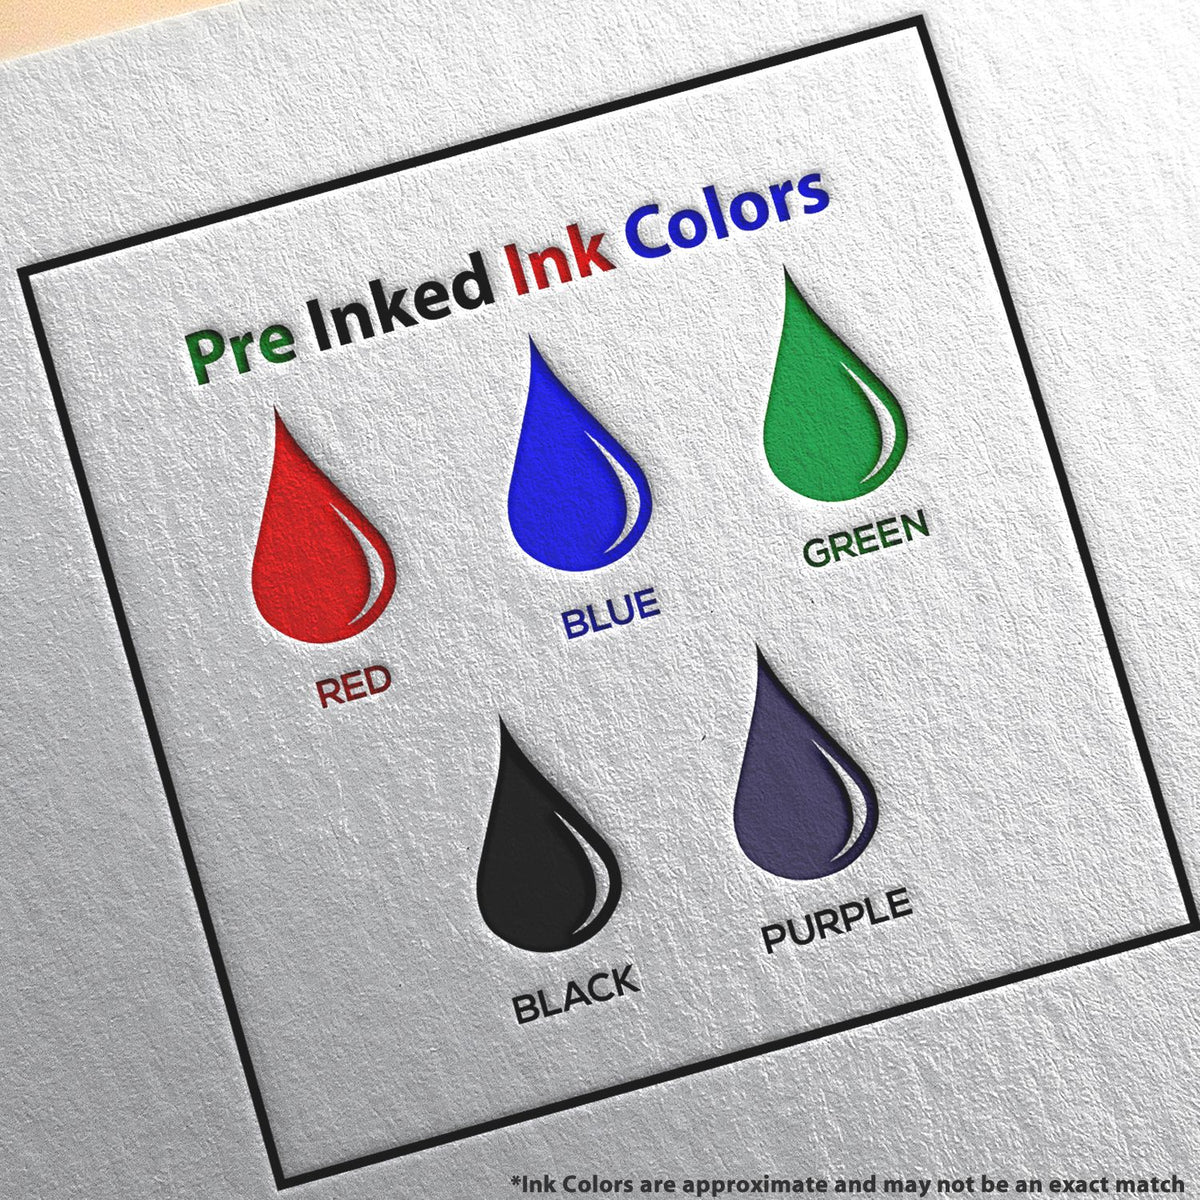 A picture showing the different ink colors or hues available for the Slim Pre-Inked Utah Professional Geologist Seal Stamp